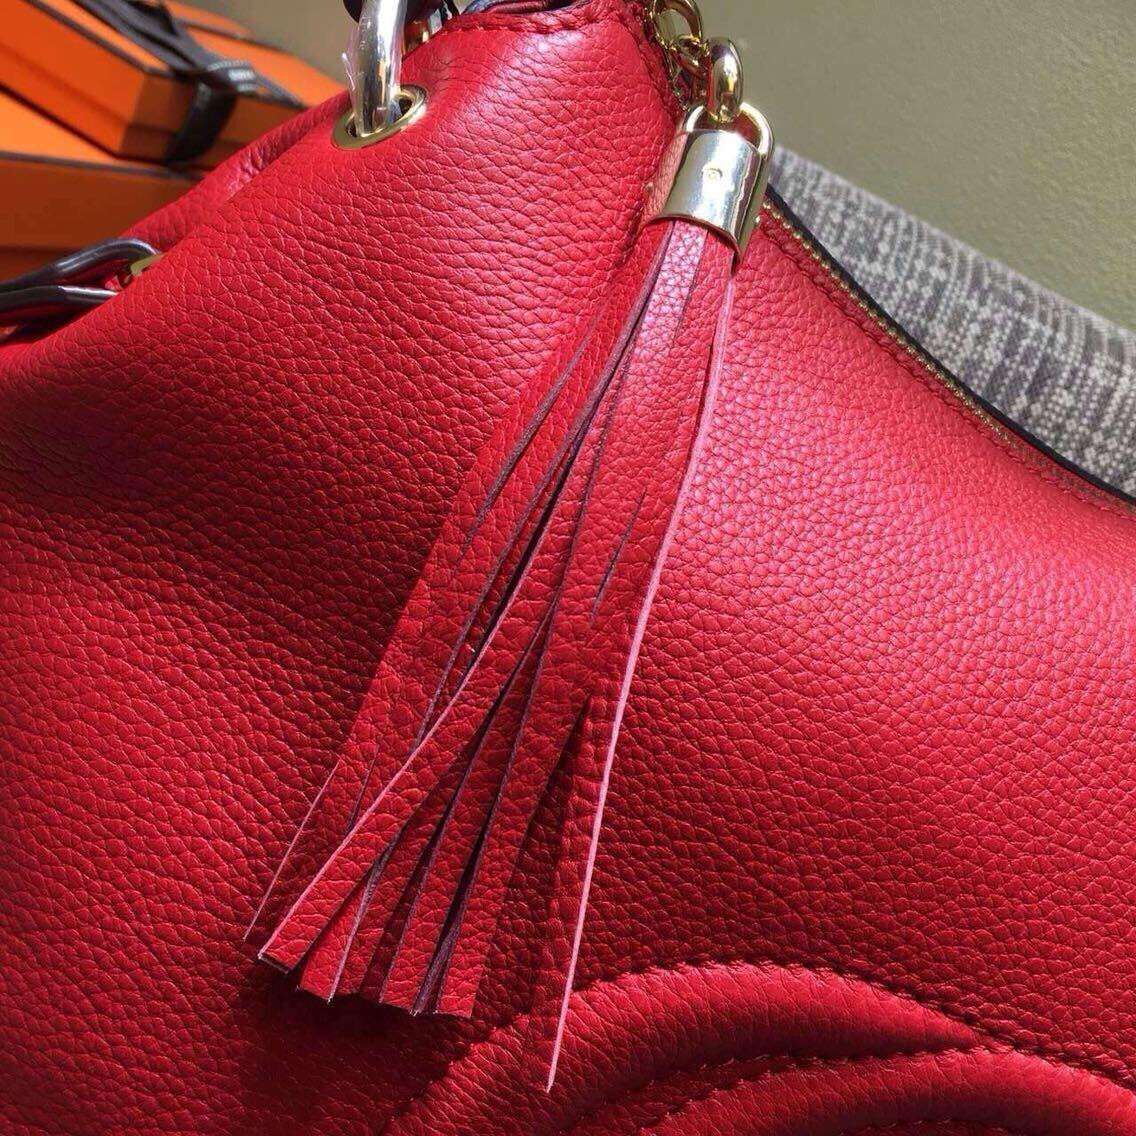 Gucci Soho Original Leather 408825 Red